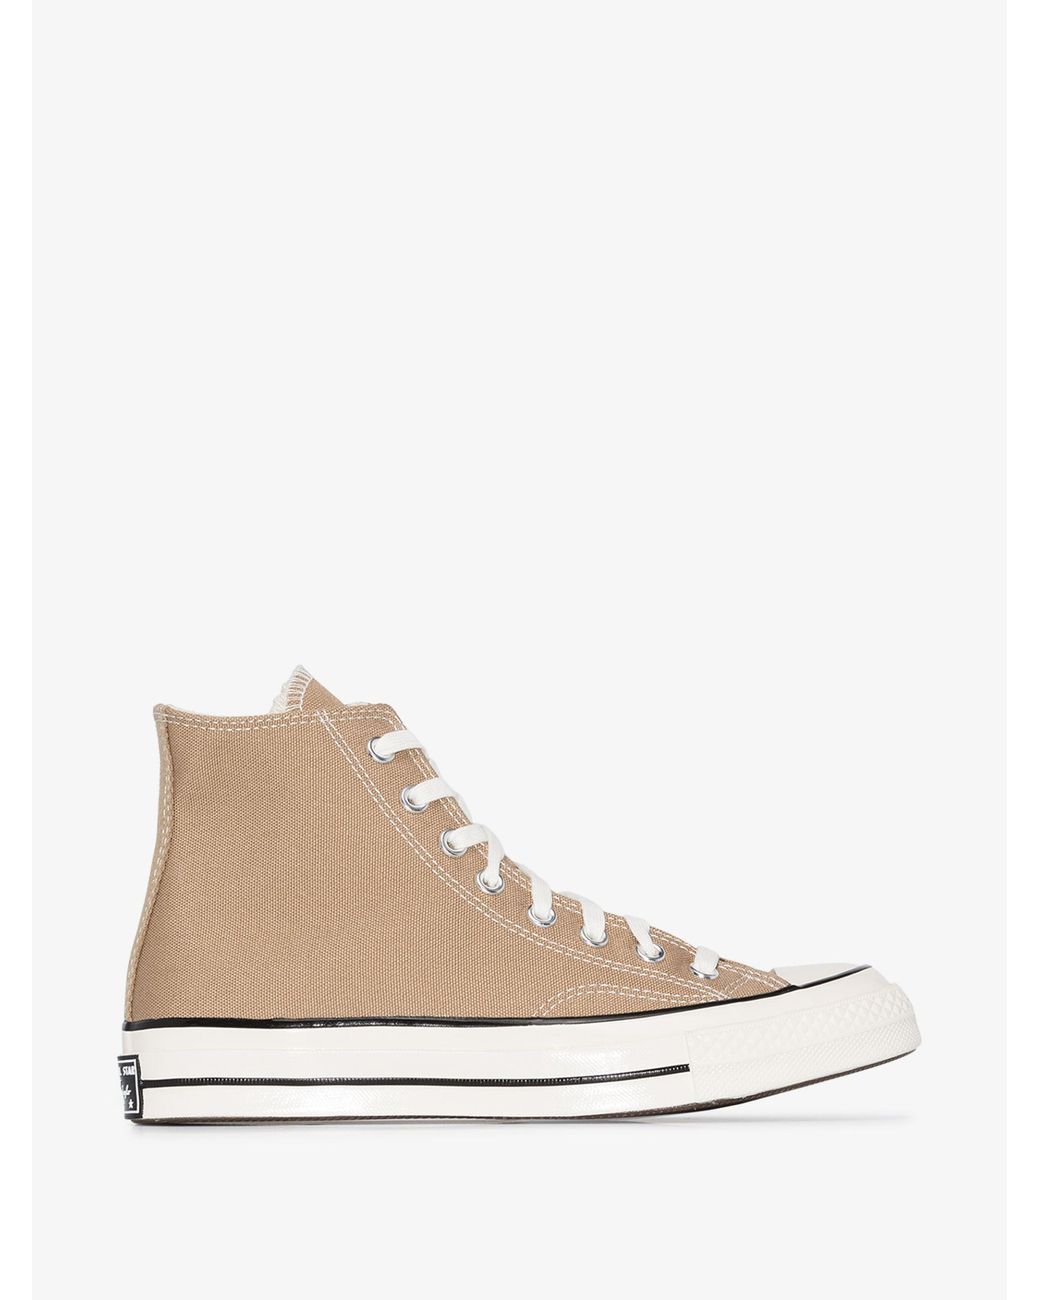 Converse Rubber Beige Chuck 70 High Top Sneakers in Brown | Lyst